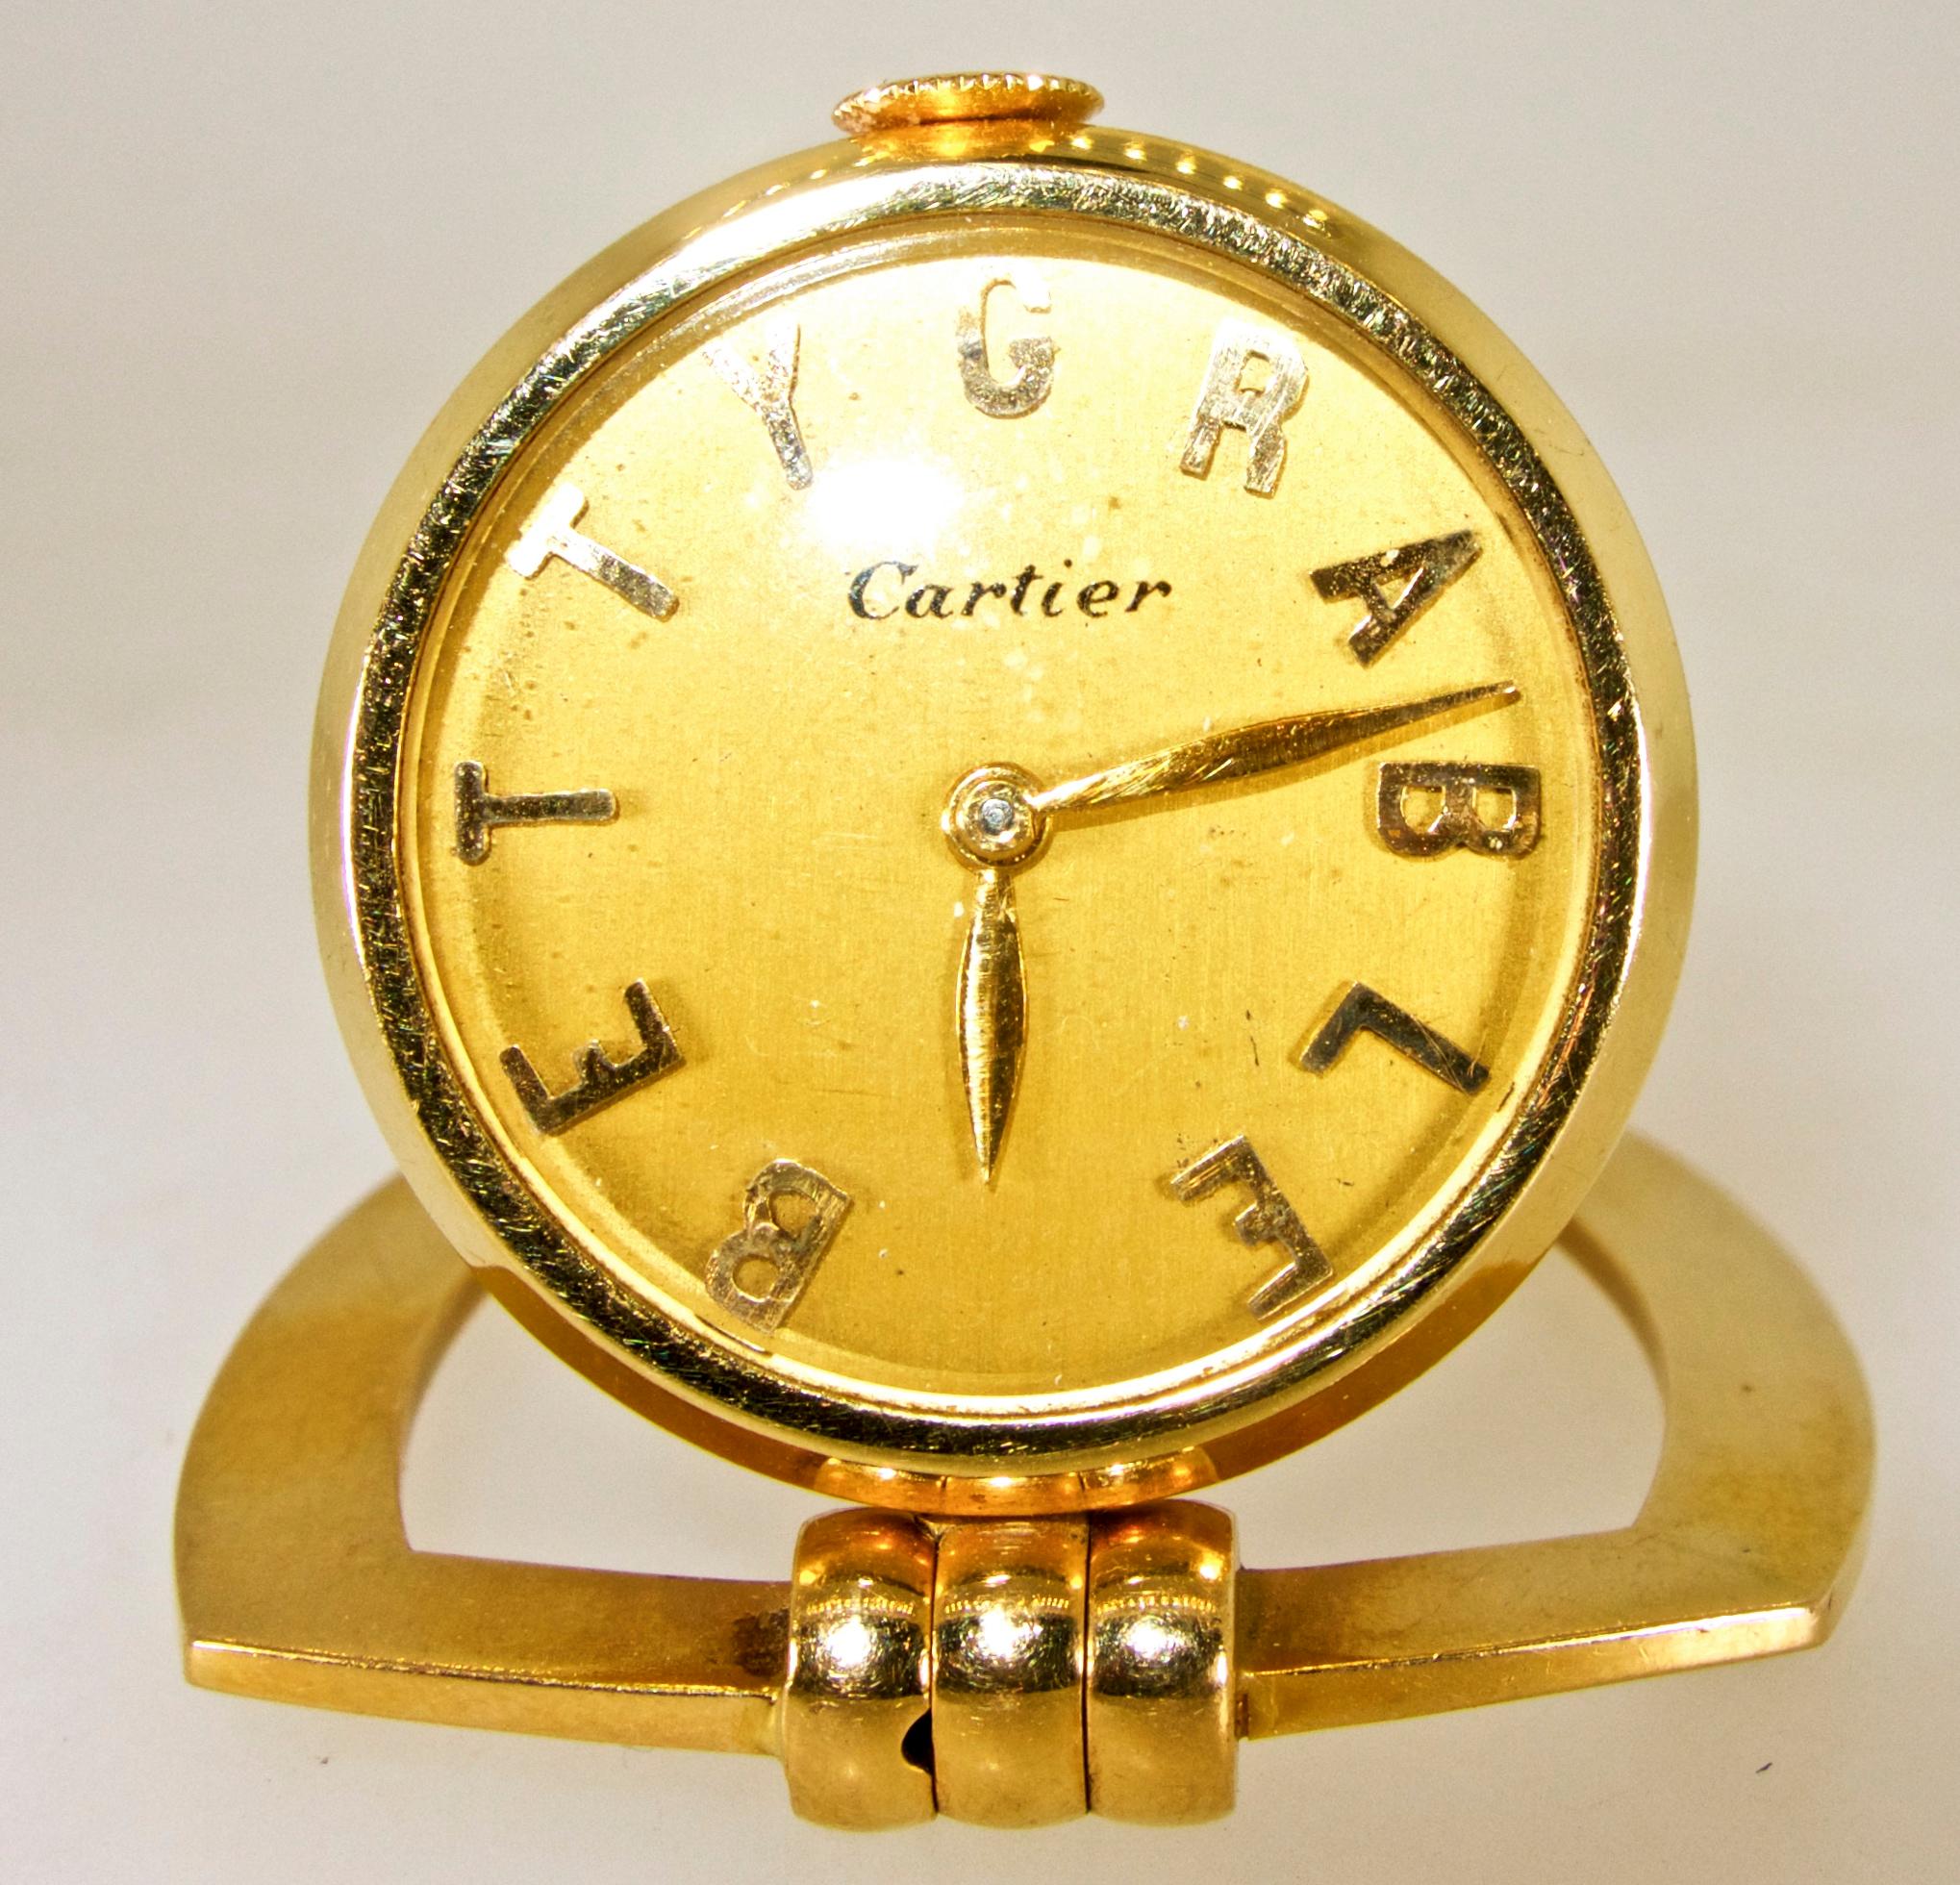 Retro Cartier Watch with Betty Grable as Chapters, circa 1955